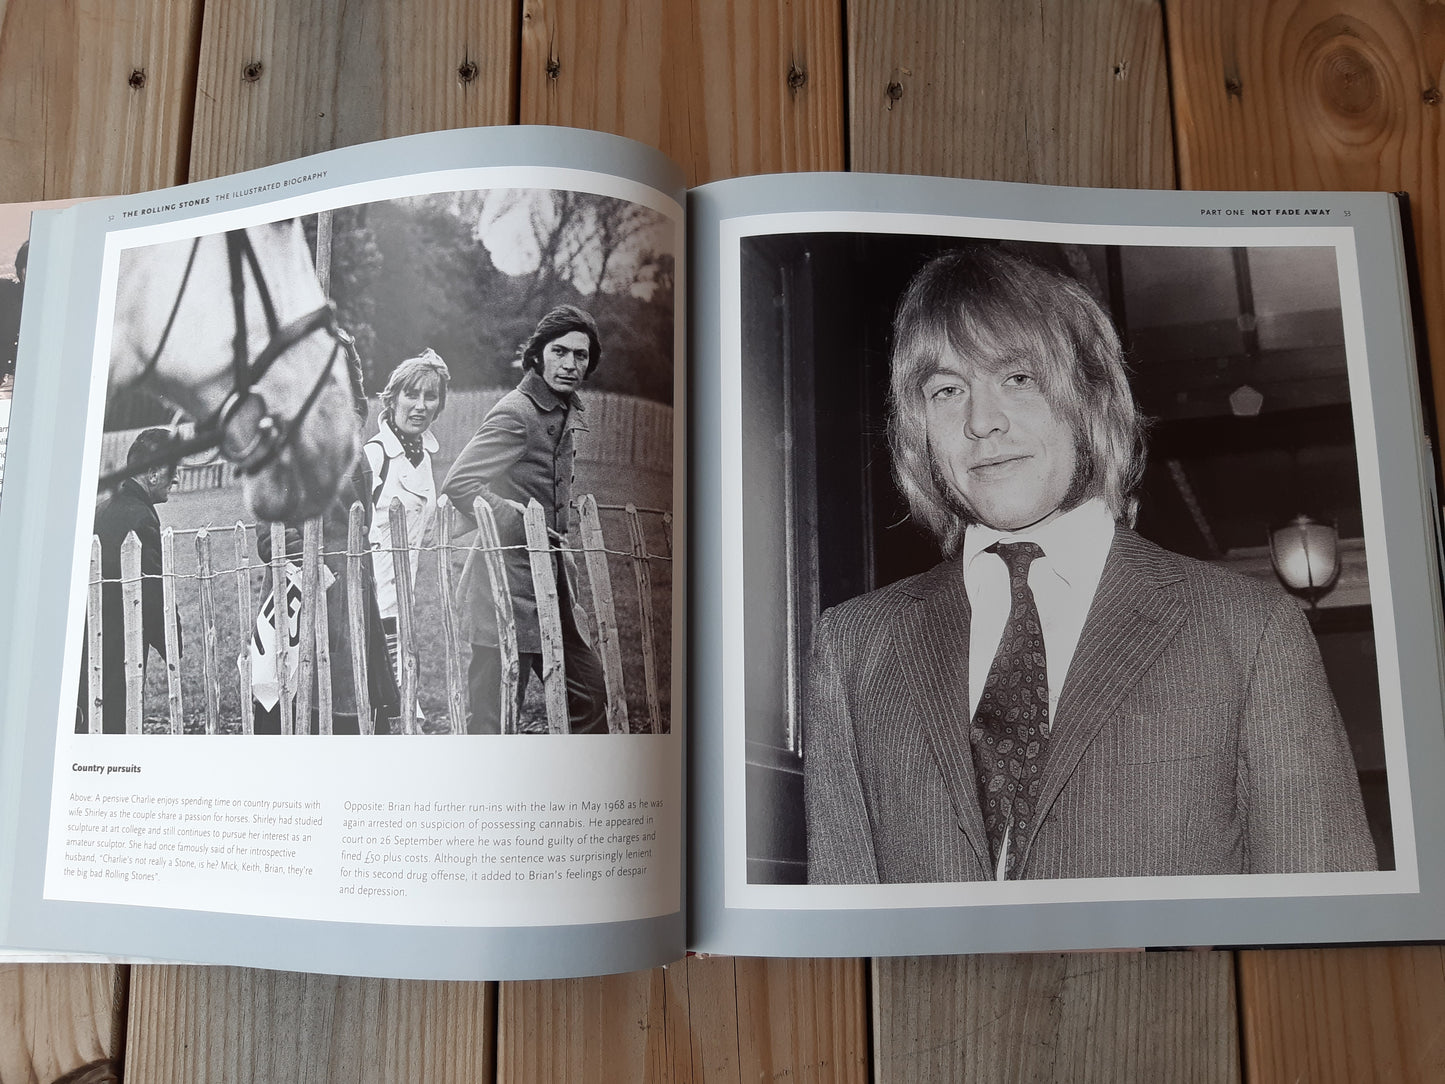 the rolling stones - the illustrated biography - kirja